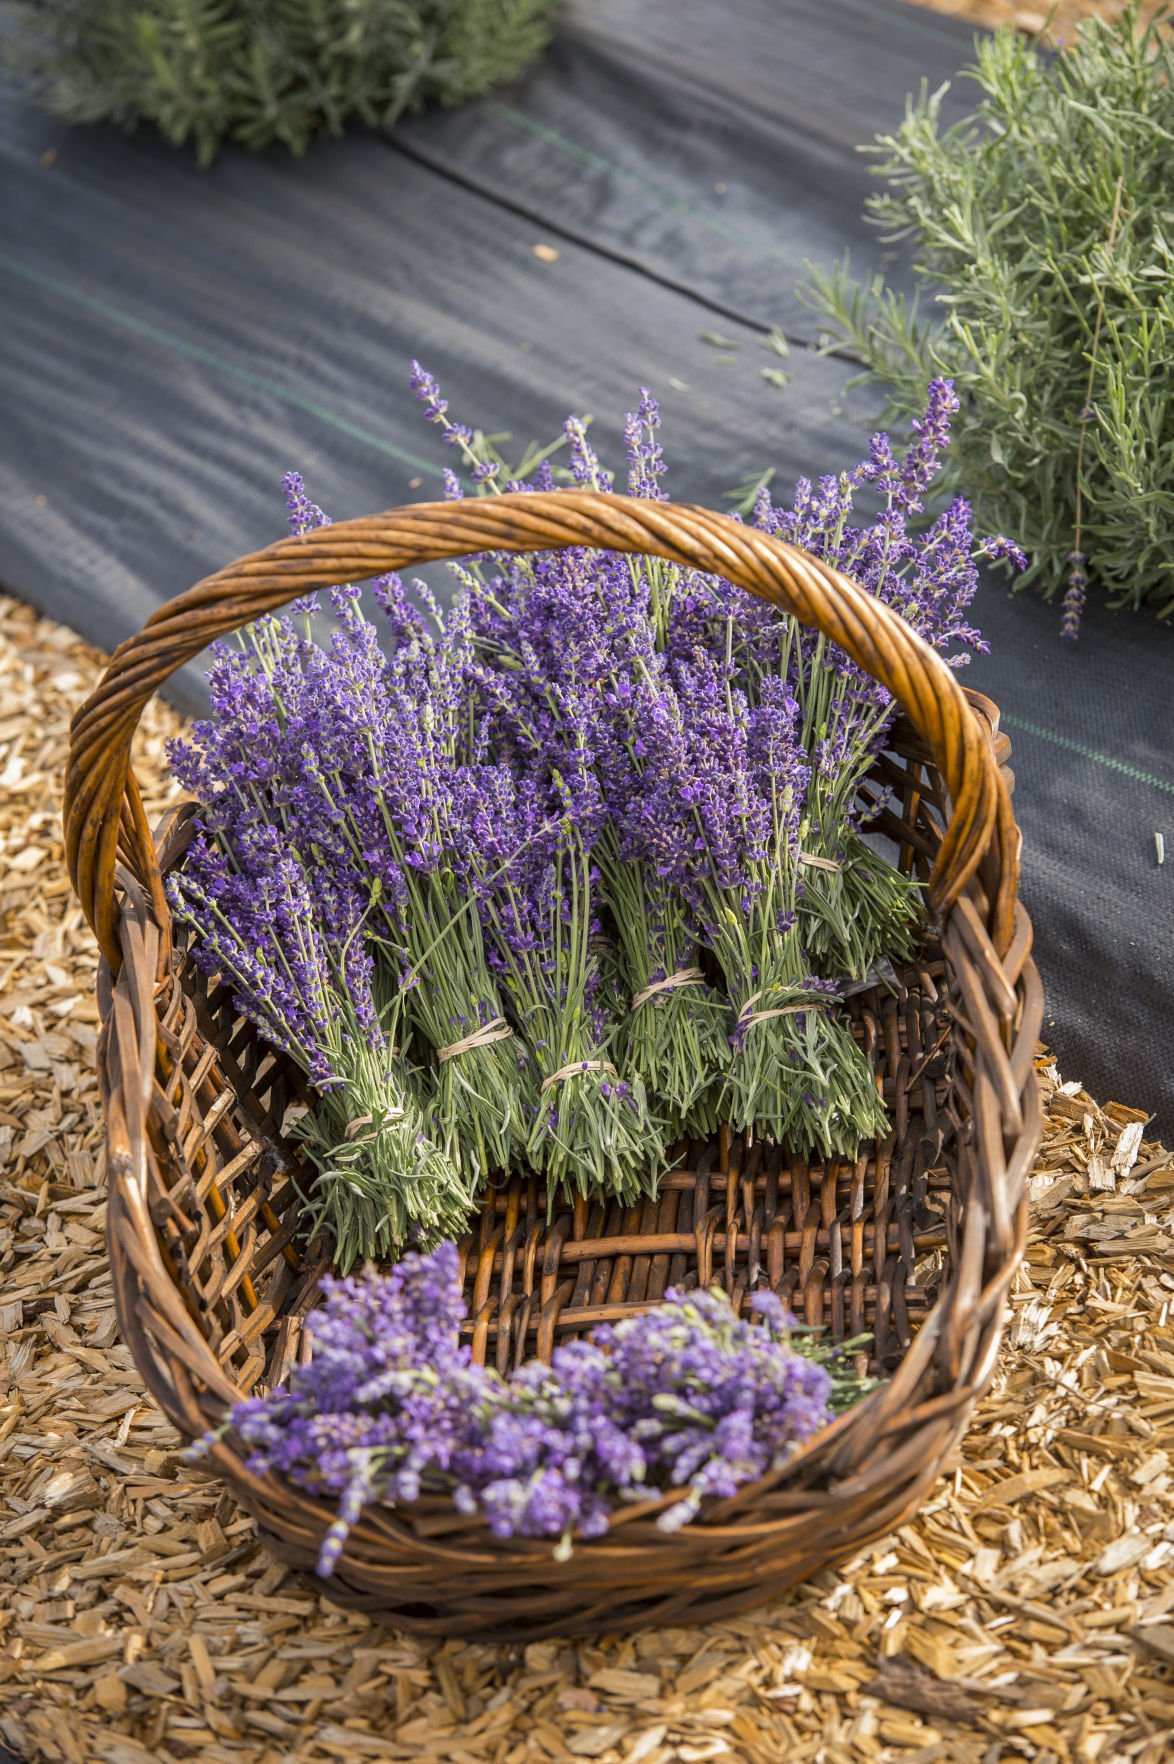 Chatfield Farms bloom into summer at Lavender Festival Ae